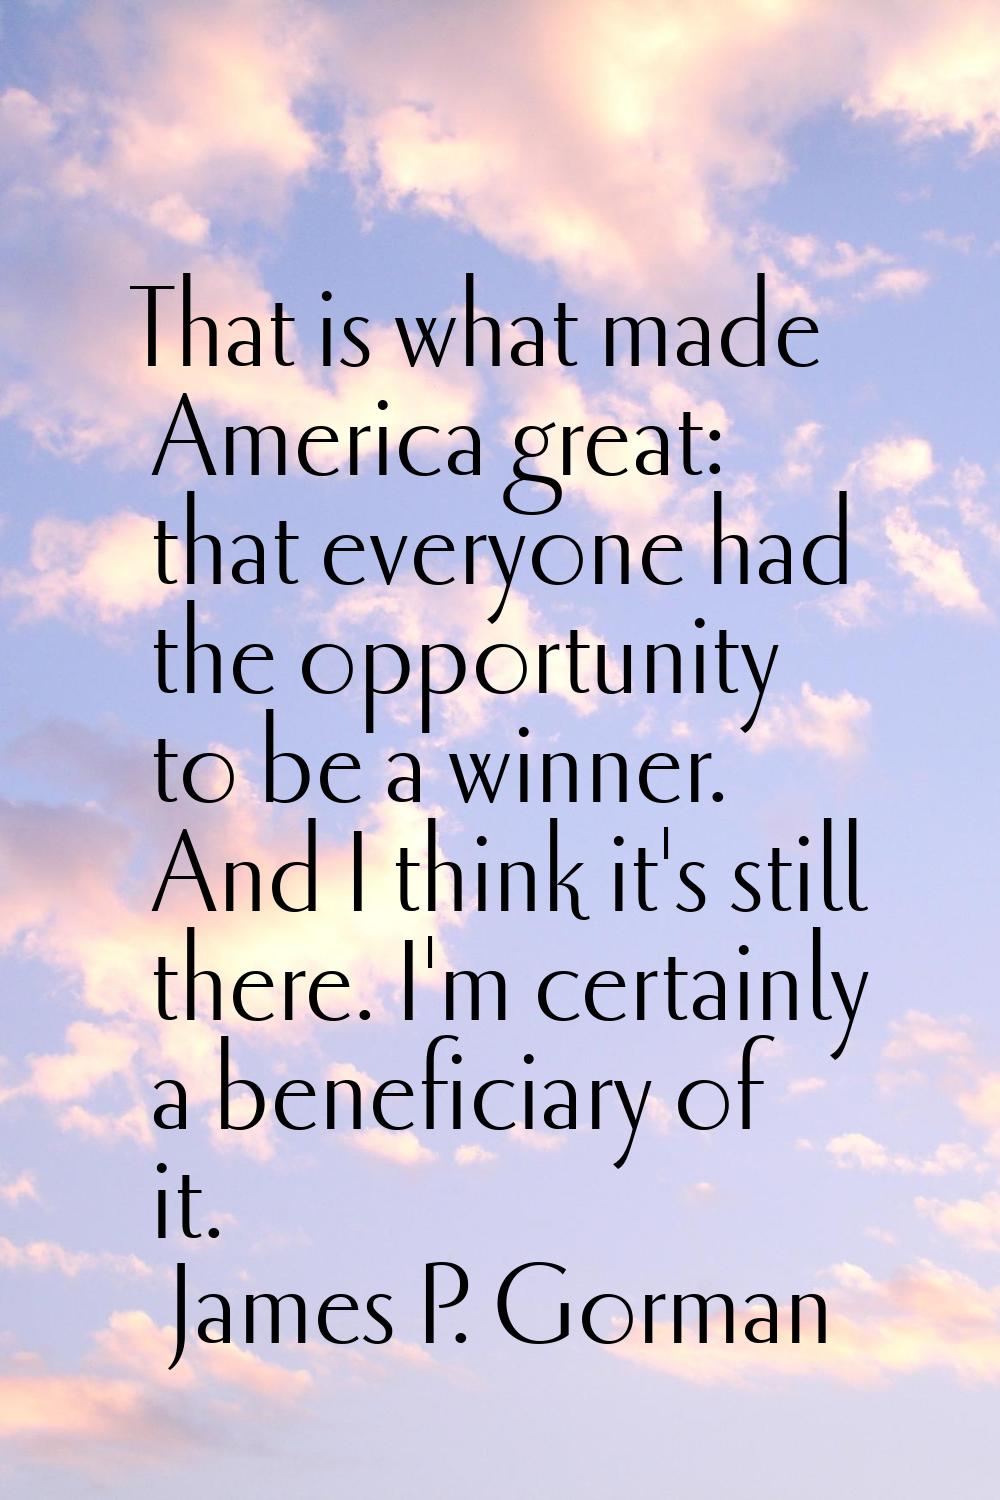 That is what made America great: that everyone had the opportunity to be a winner. And I think it's